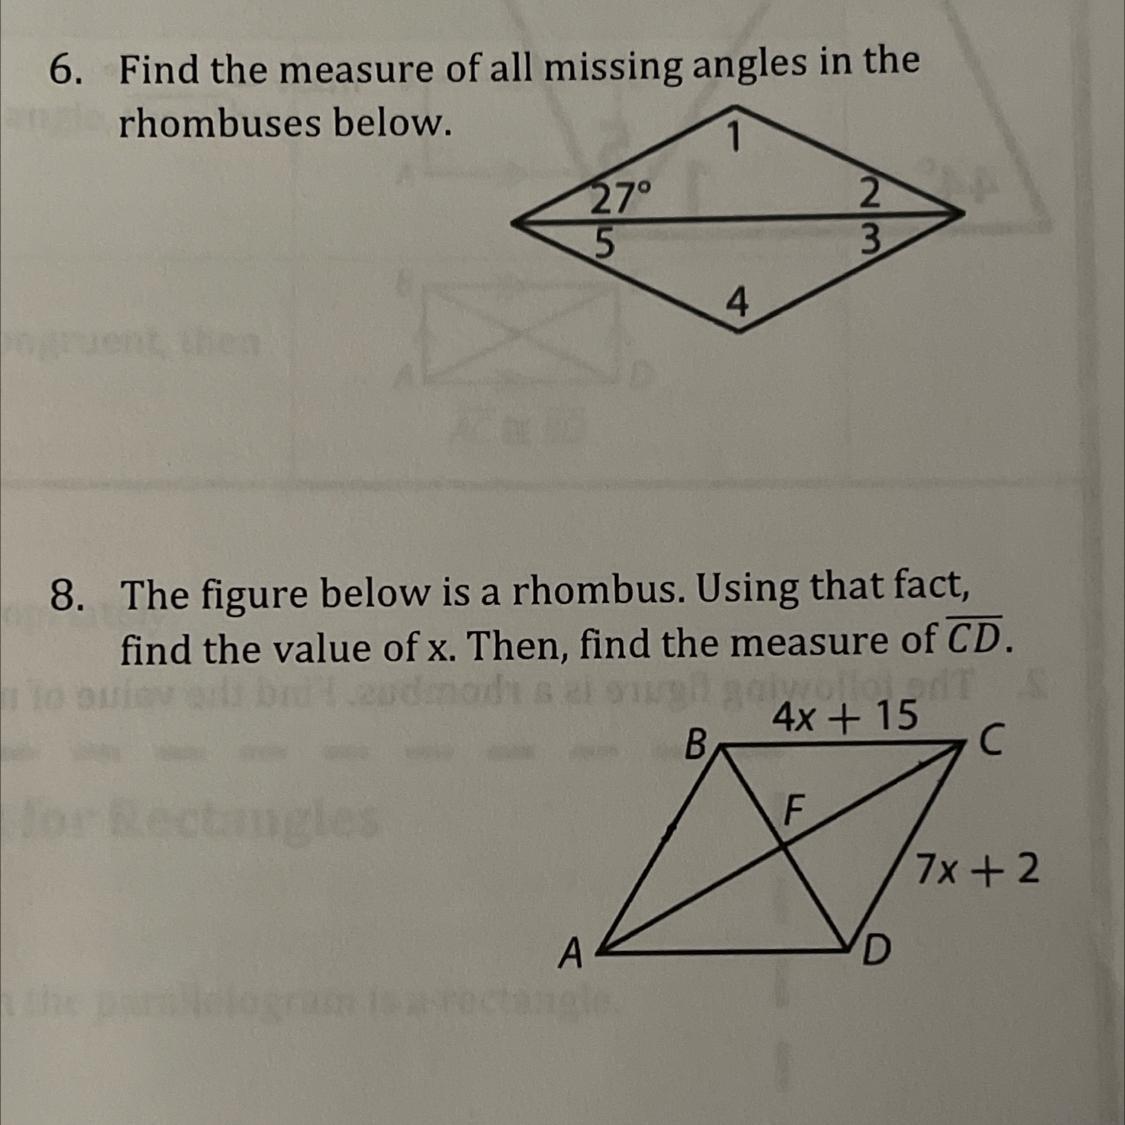 Can Someone Please Help Me Do #6 And #8 Please 